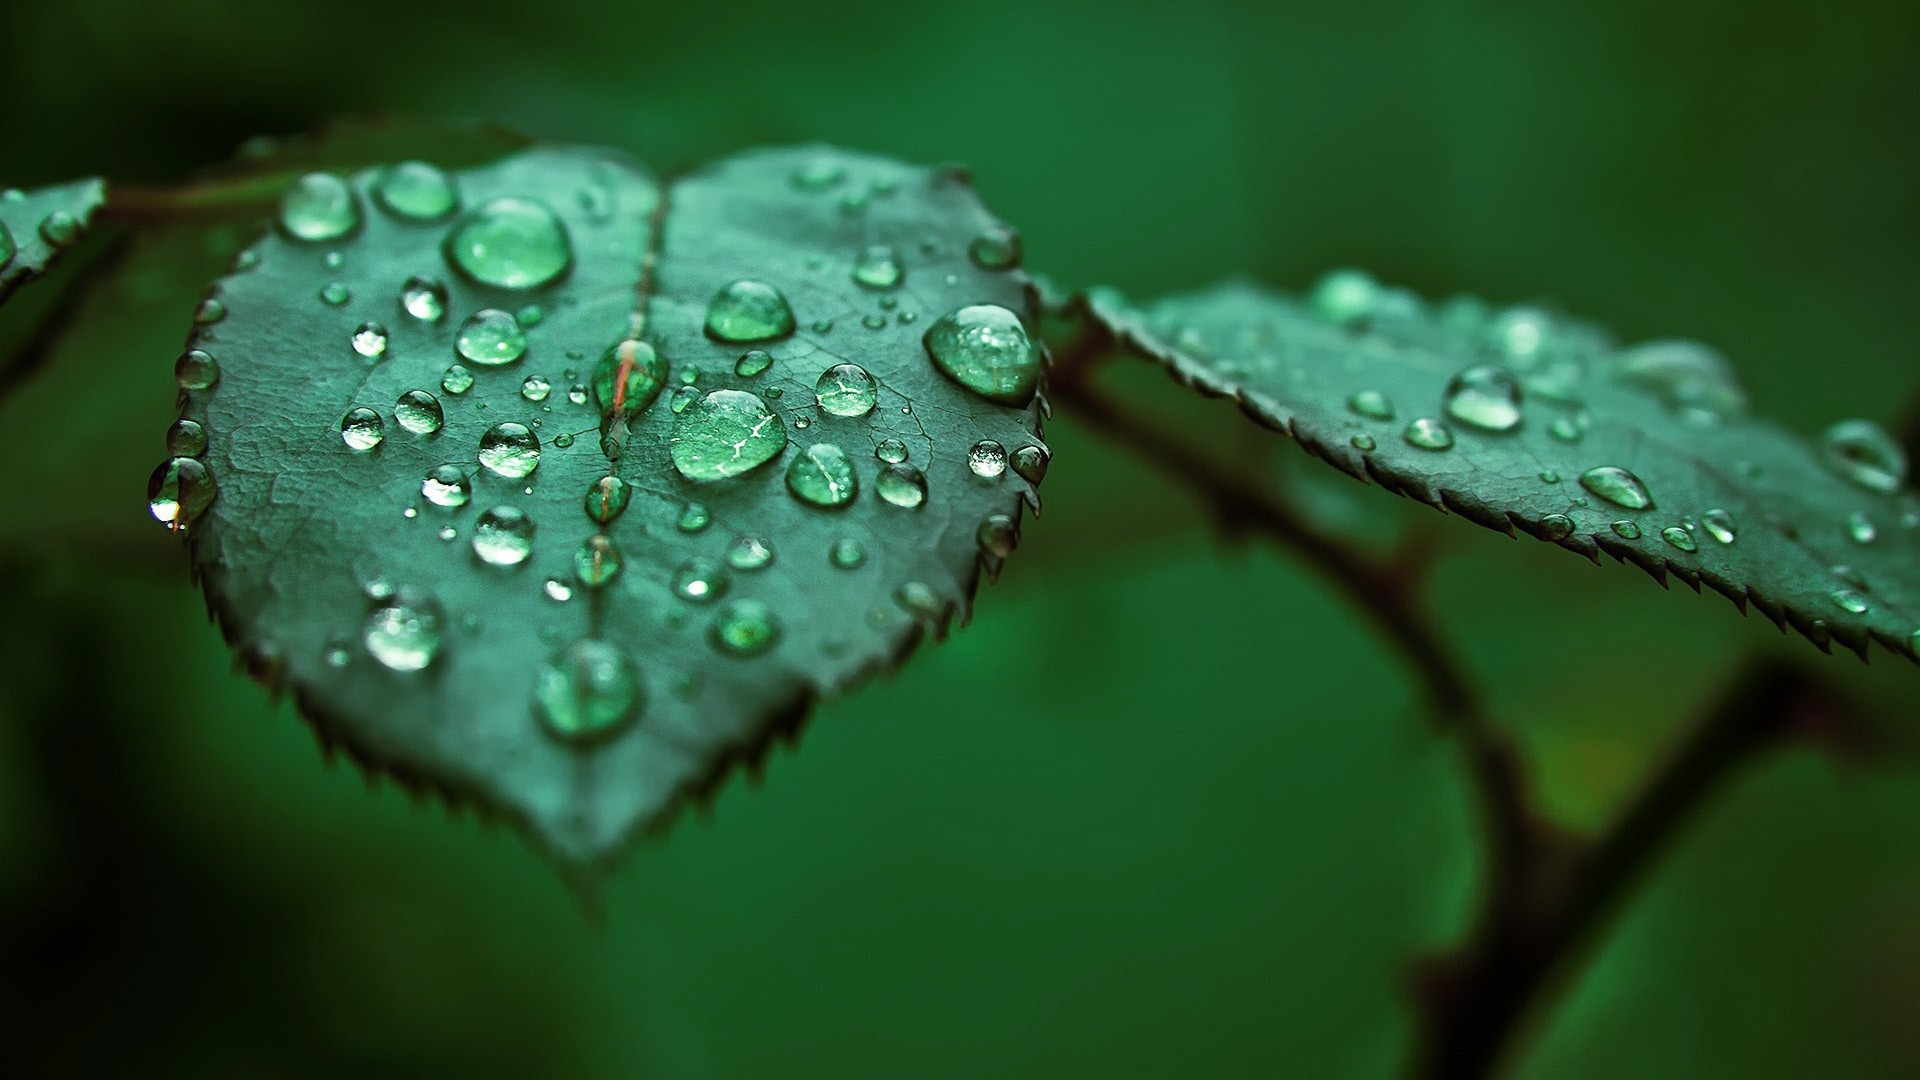 Large raindrops on green leaves